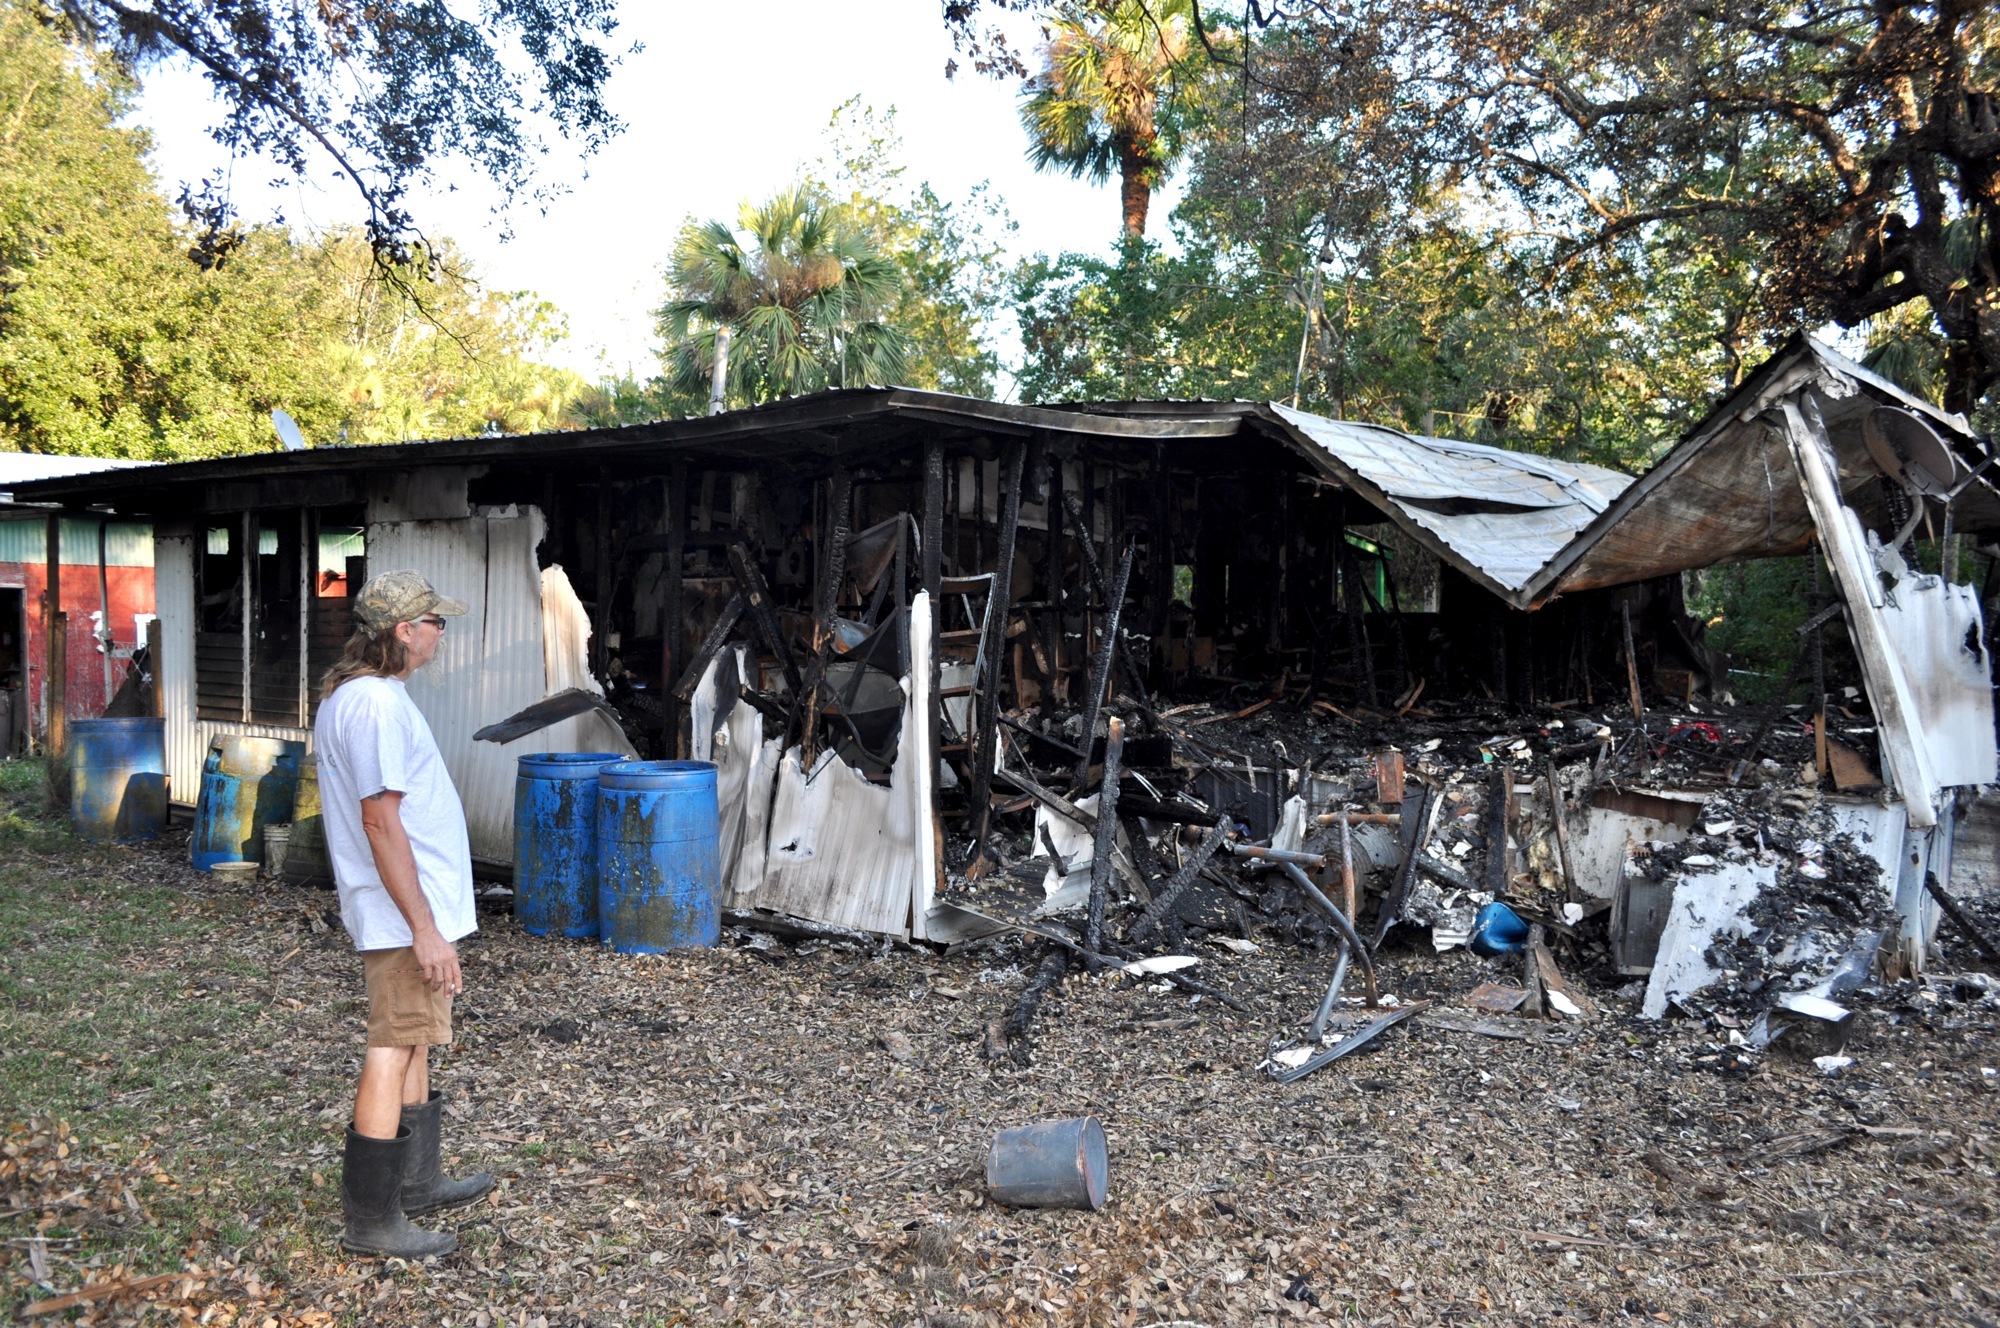 John Martin stands at the back of his mother's burned down house. Photo by Ray Boone